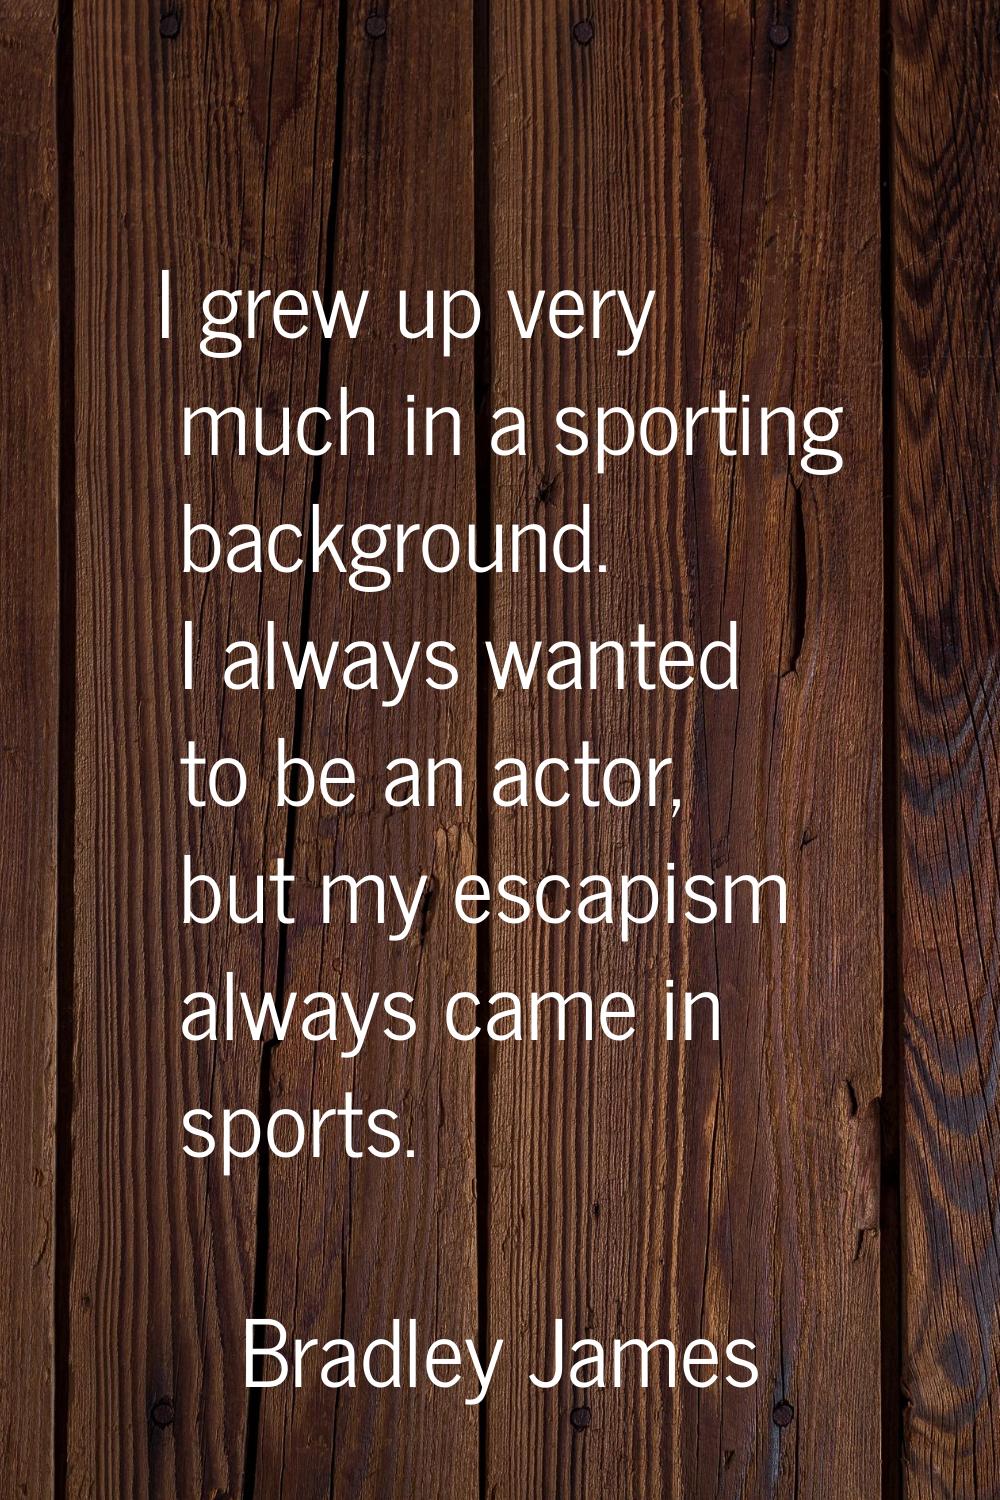 I grew up very much in a sporting background. I always wanted to be an actor, but my escapism alway